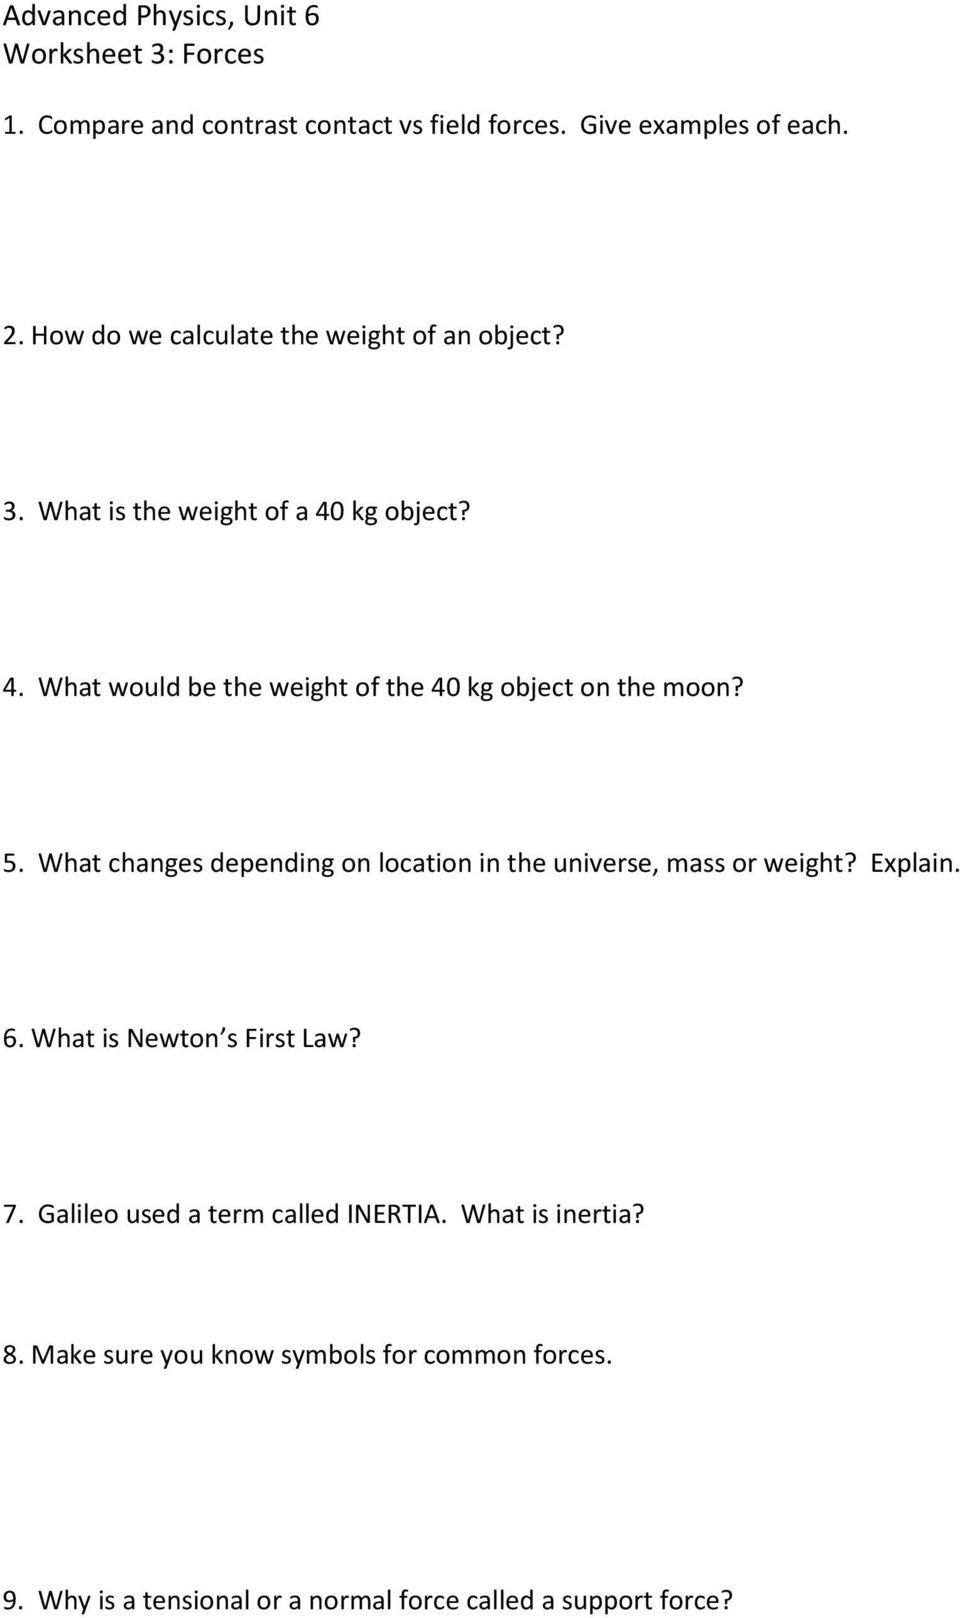 Mass and Weight Worksheet Worksheet 1 Free Body or force Diagrams Pdf Free Download